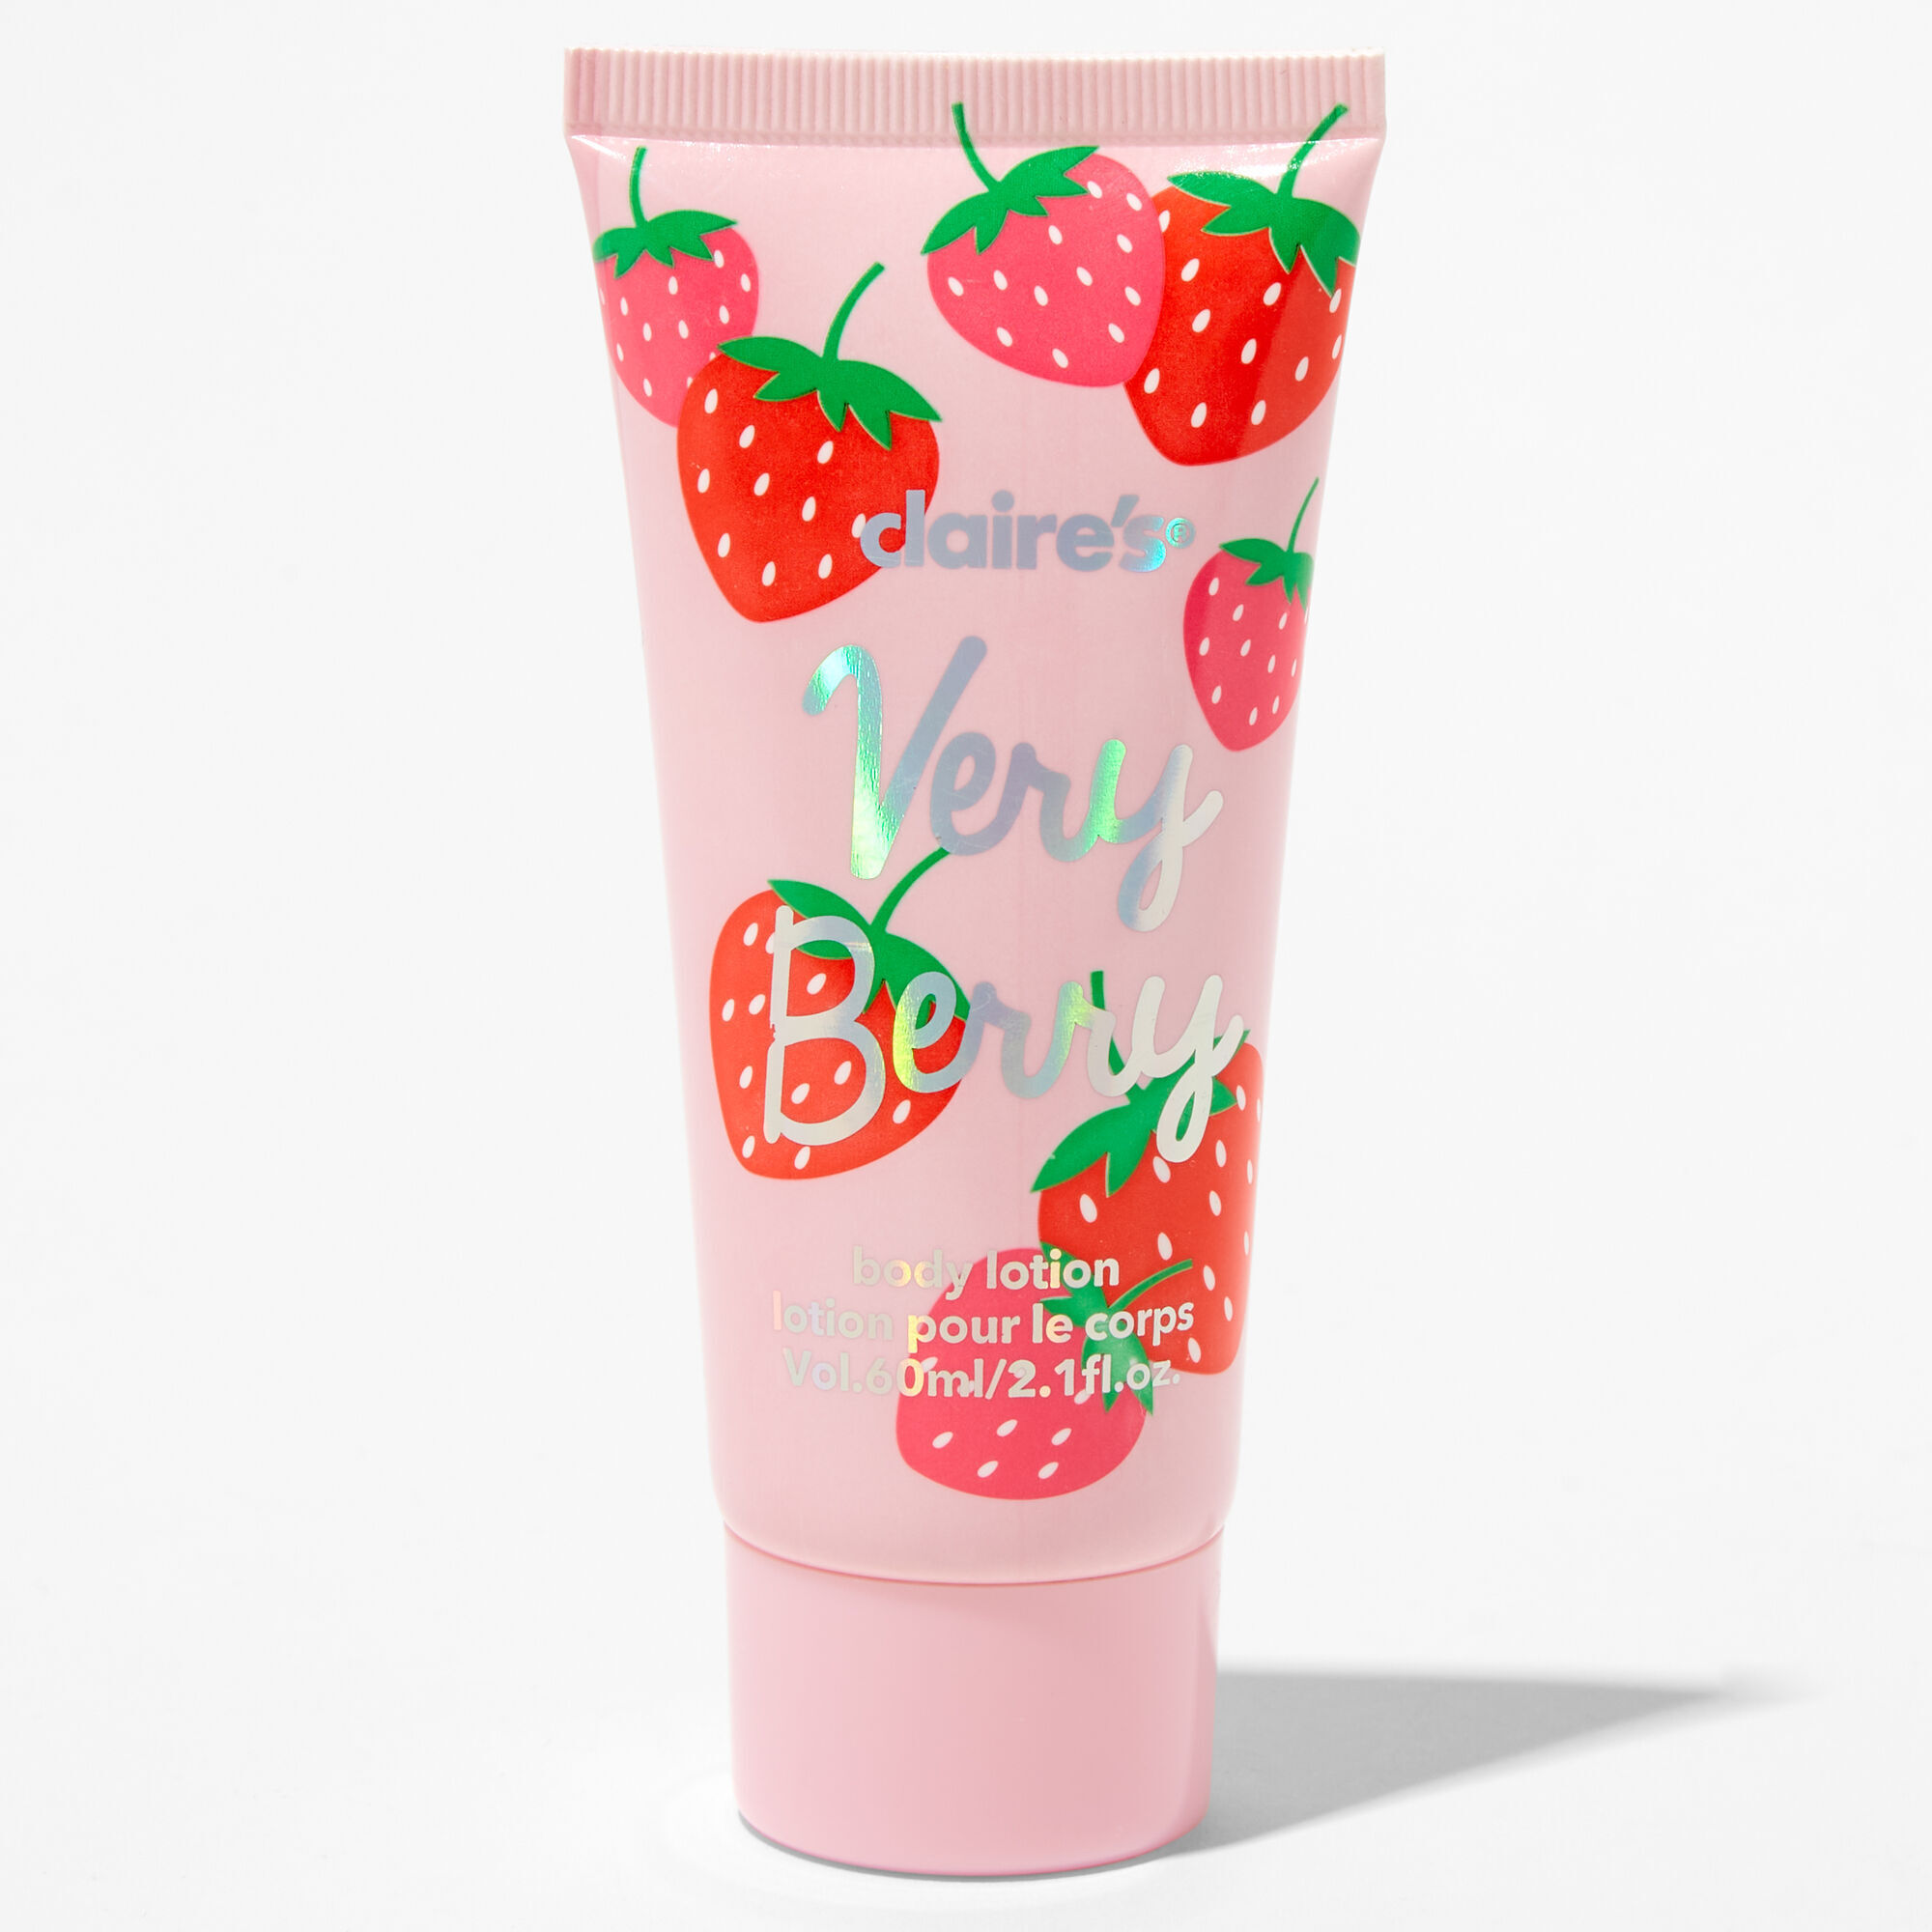 View Claires Very Berry Body Lotion information